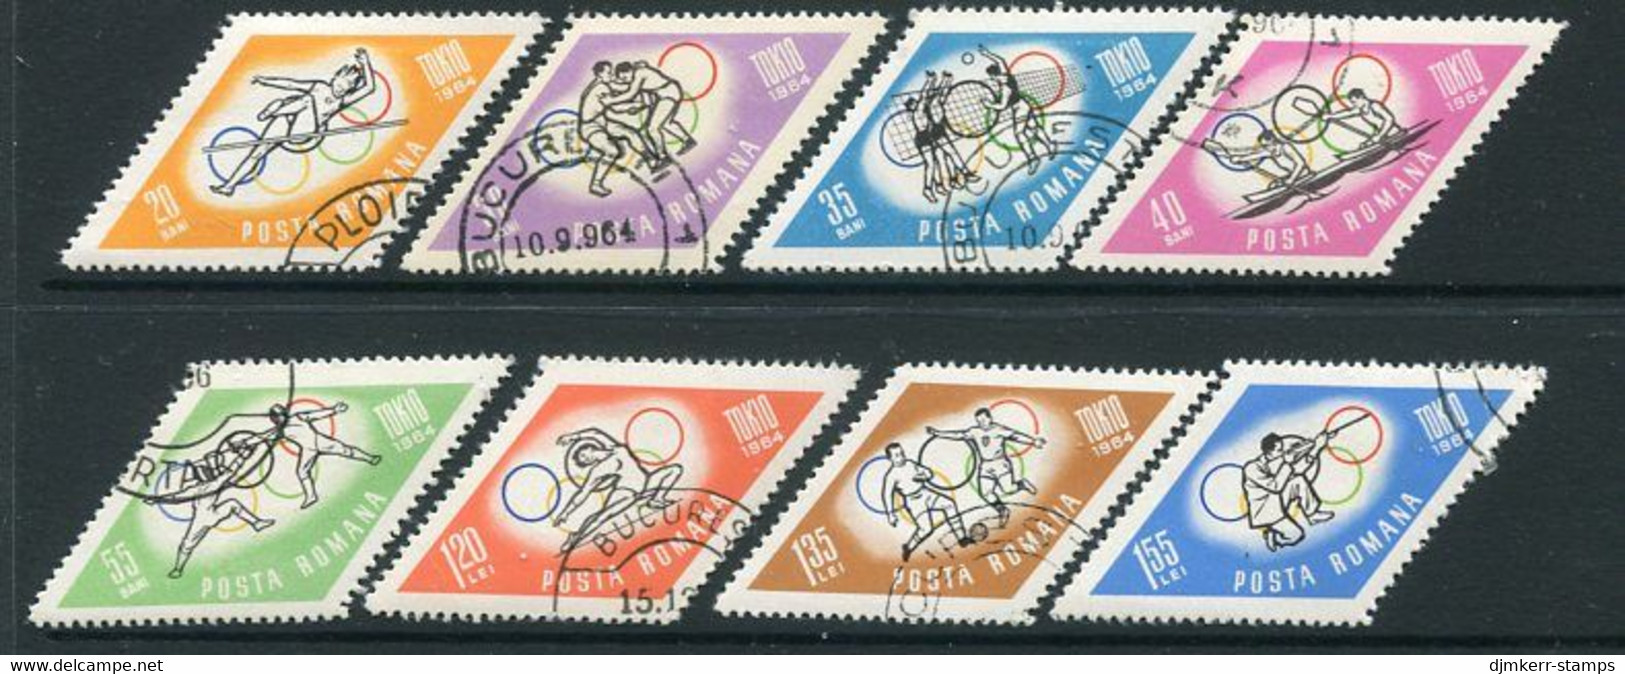 ROMANIA 1964 Tokyo Olympic Games Perforated Used.  Michel 2309-16 - Used Stamps